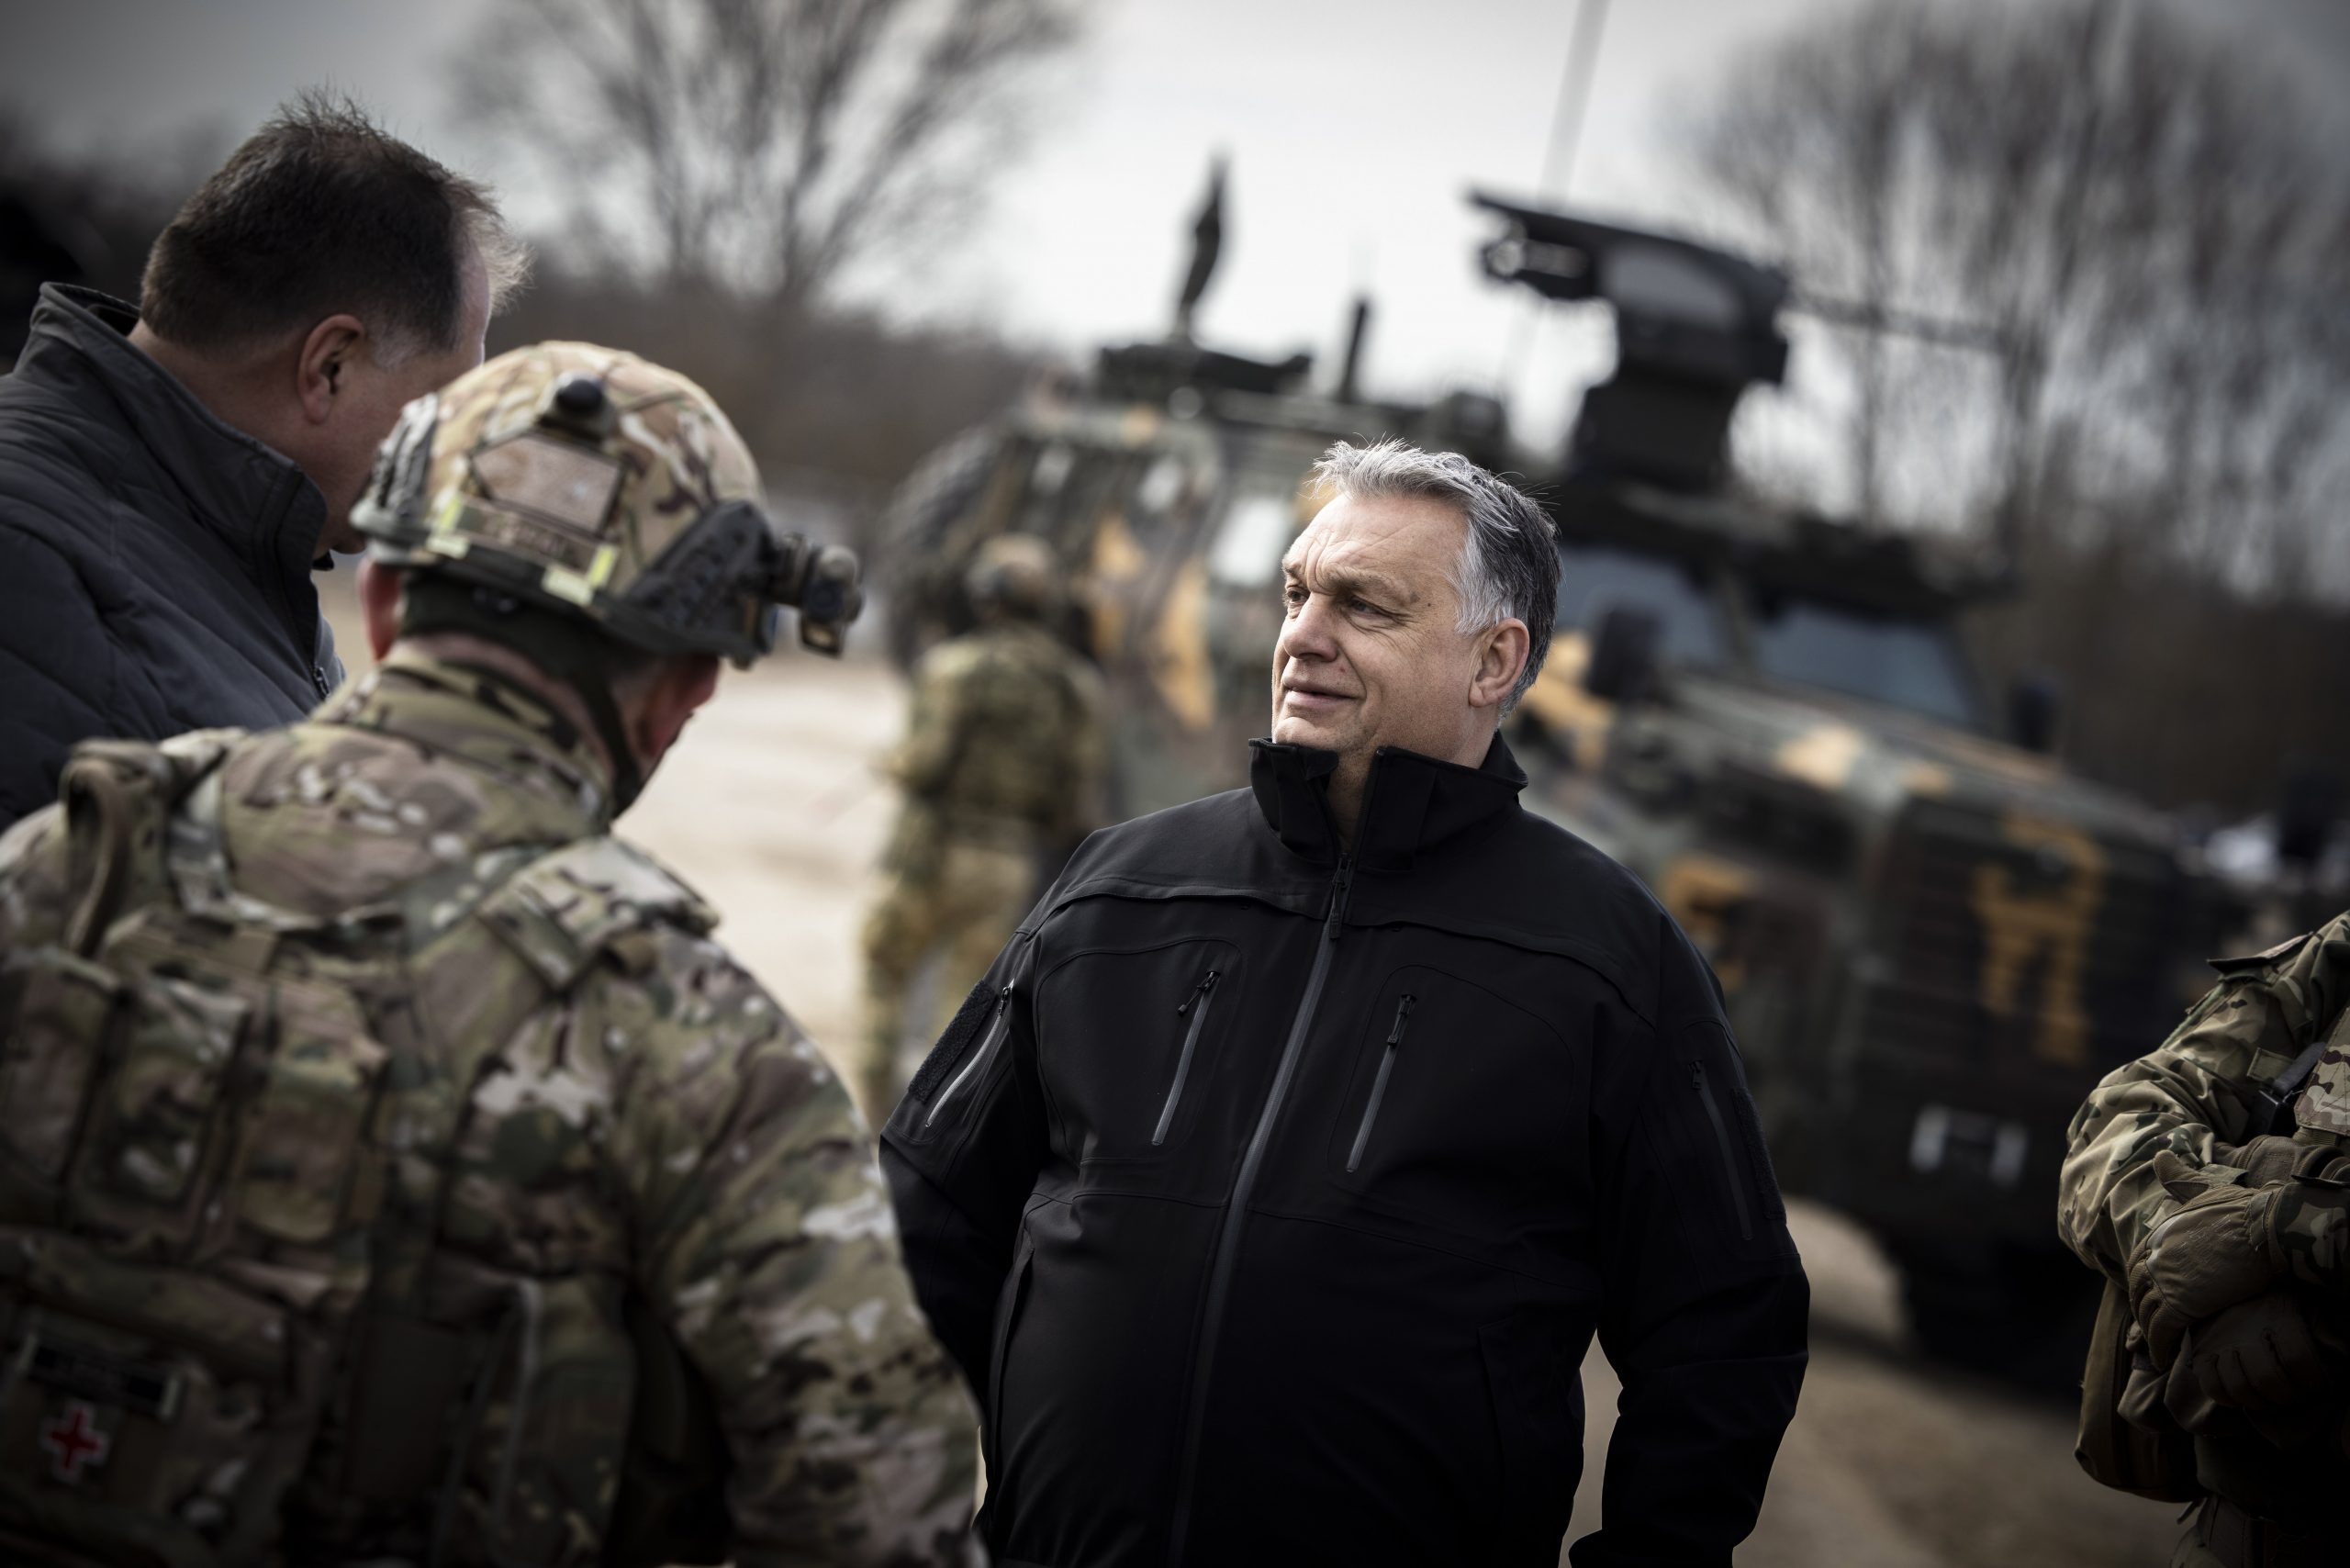 PM Orbán Also Listed as “Enemy of Ukraine”